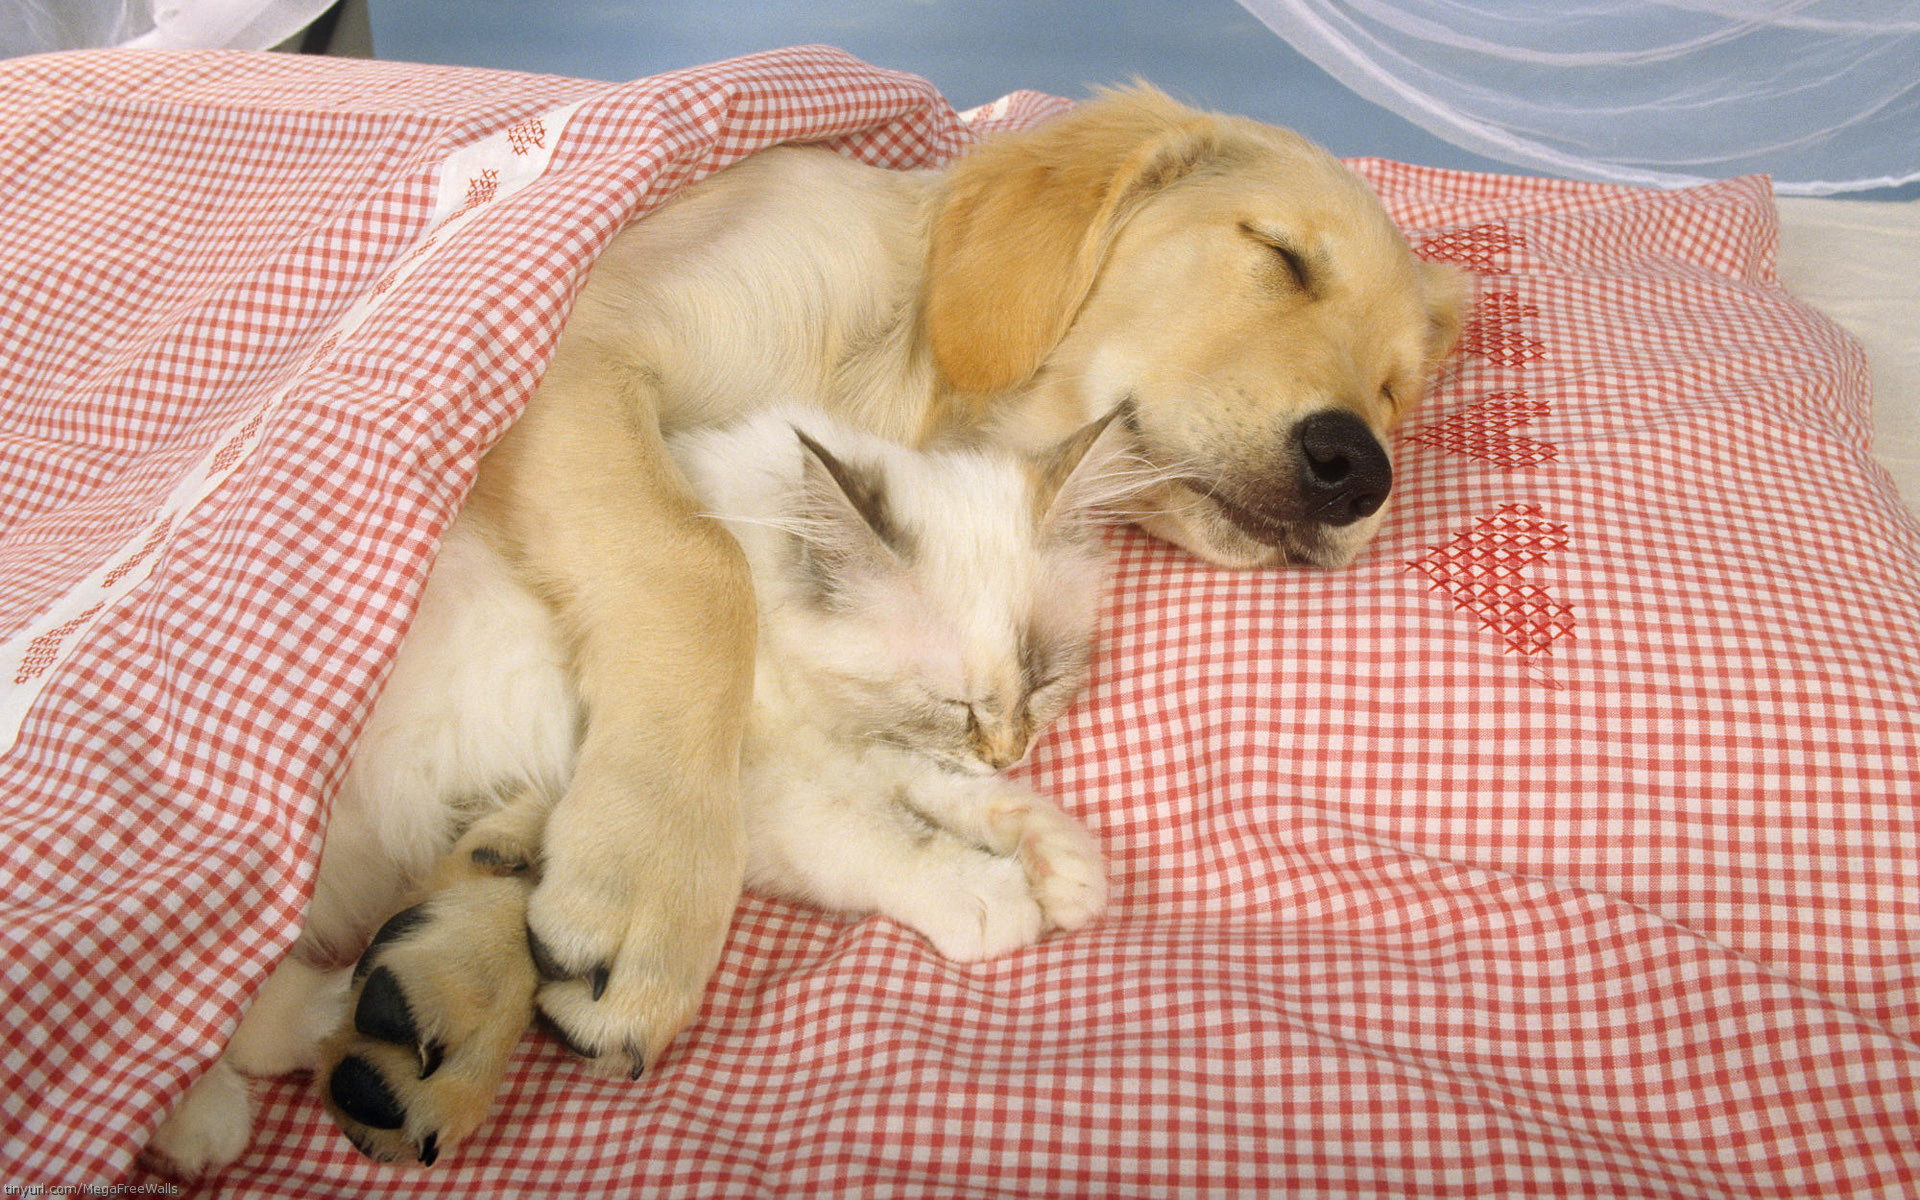 Dog cuddling a Cat in Bed by Scott Ford